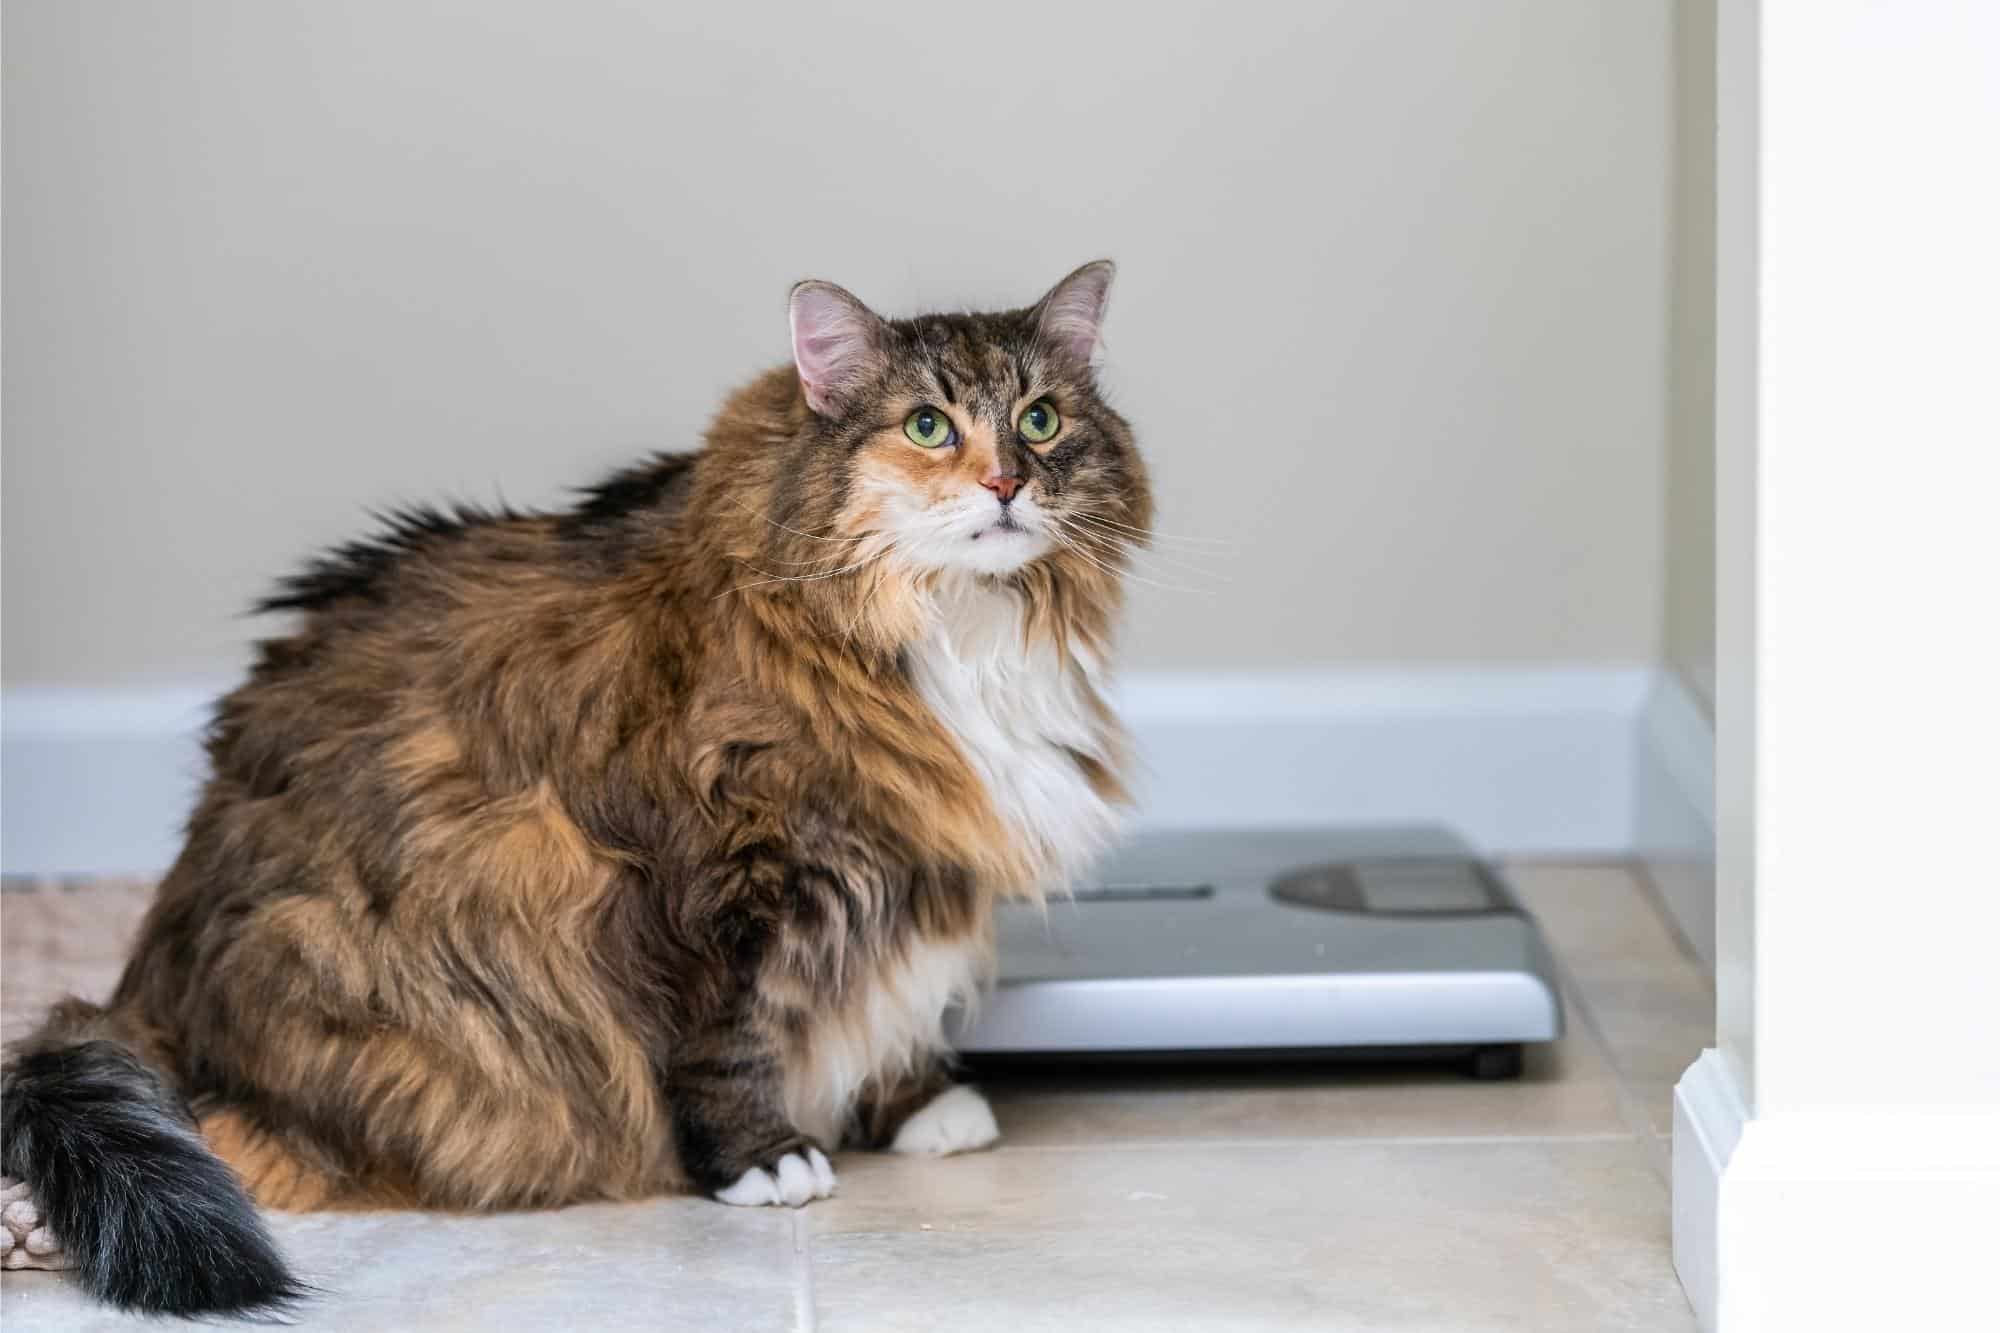 How to Help a Cat Lose Weight: 8 Things to Try